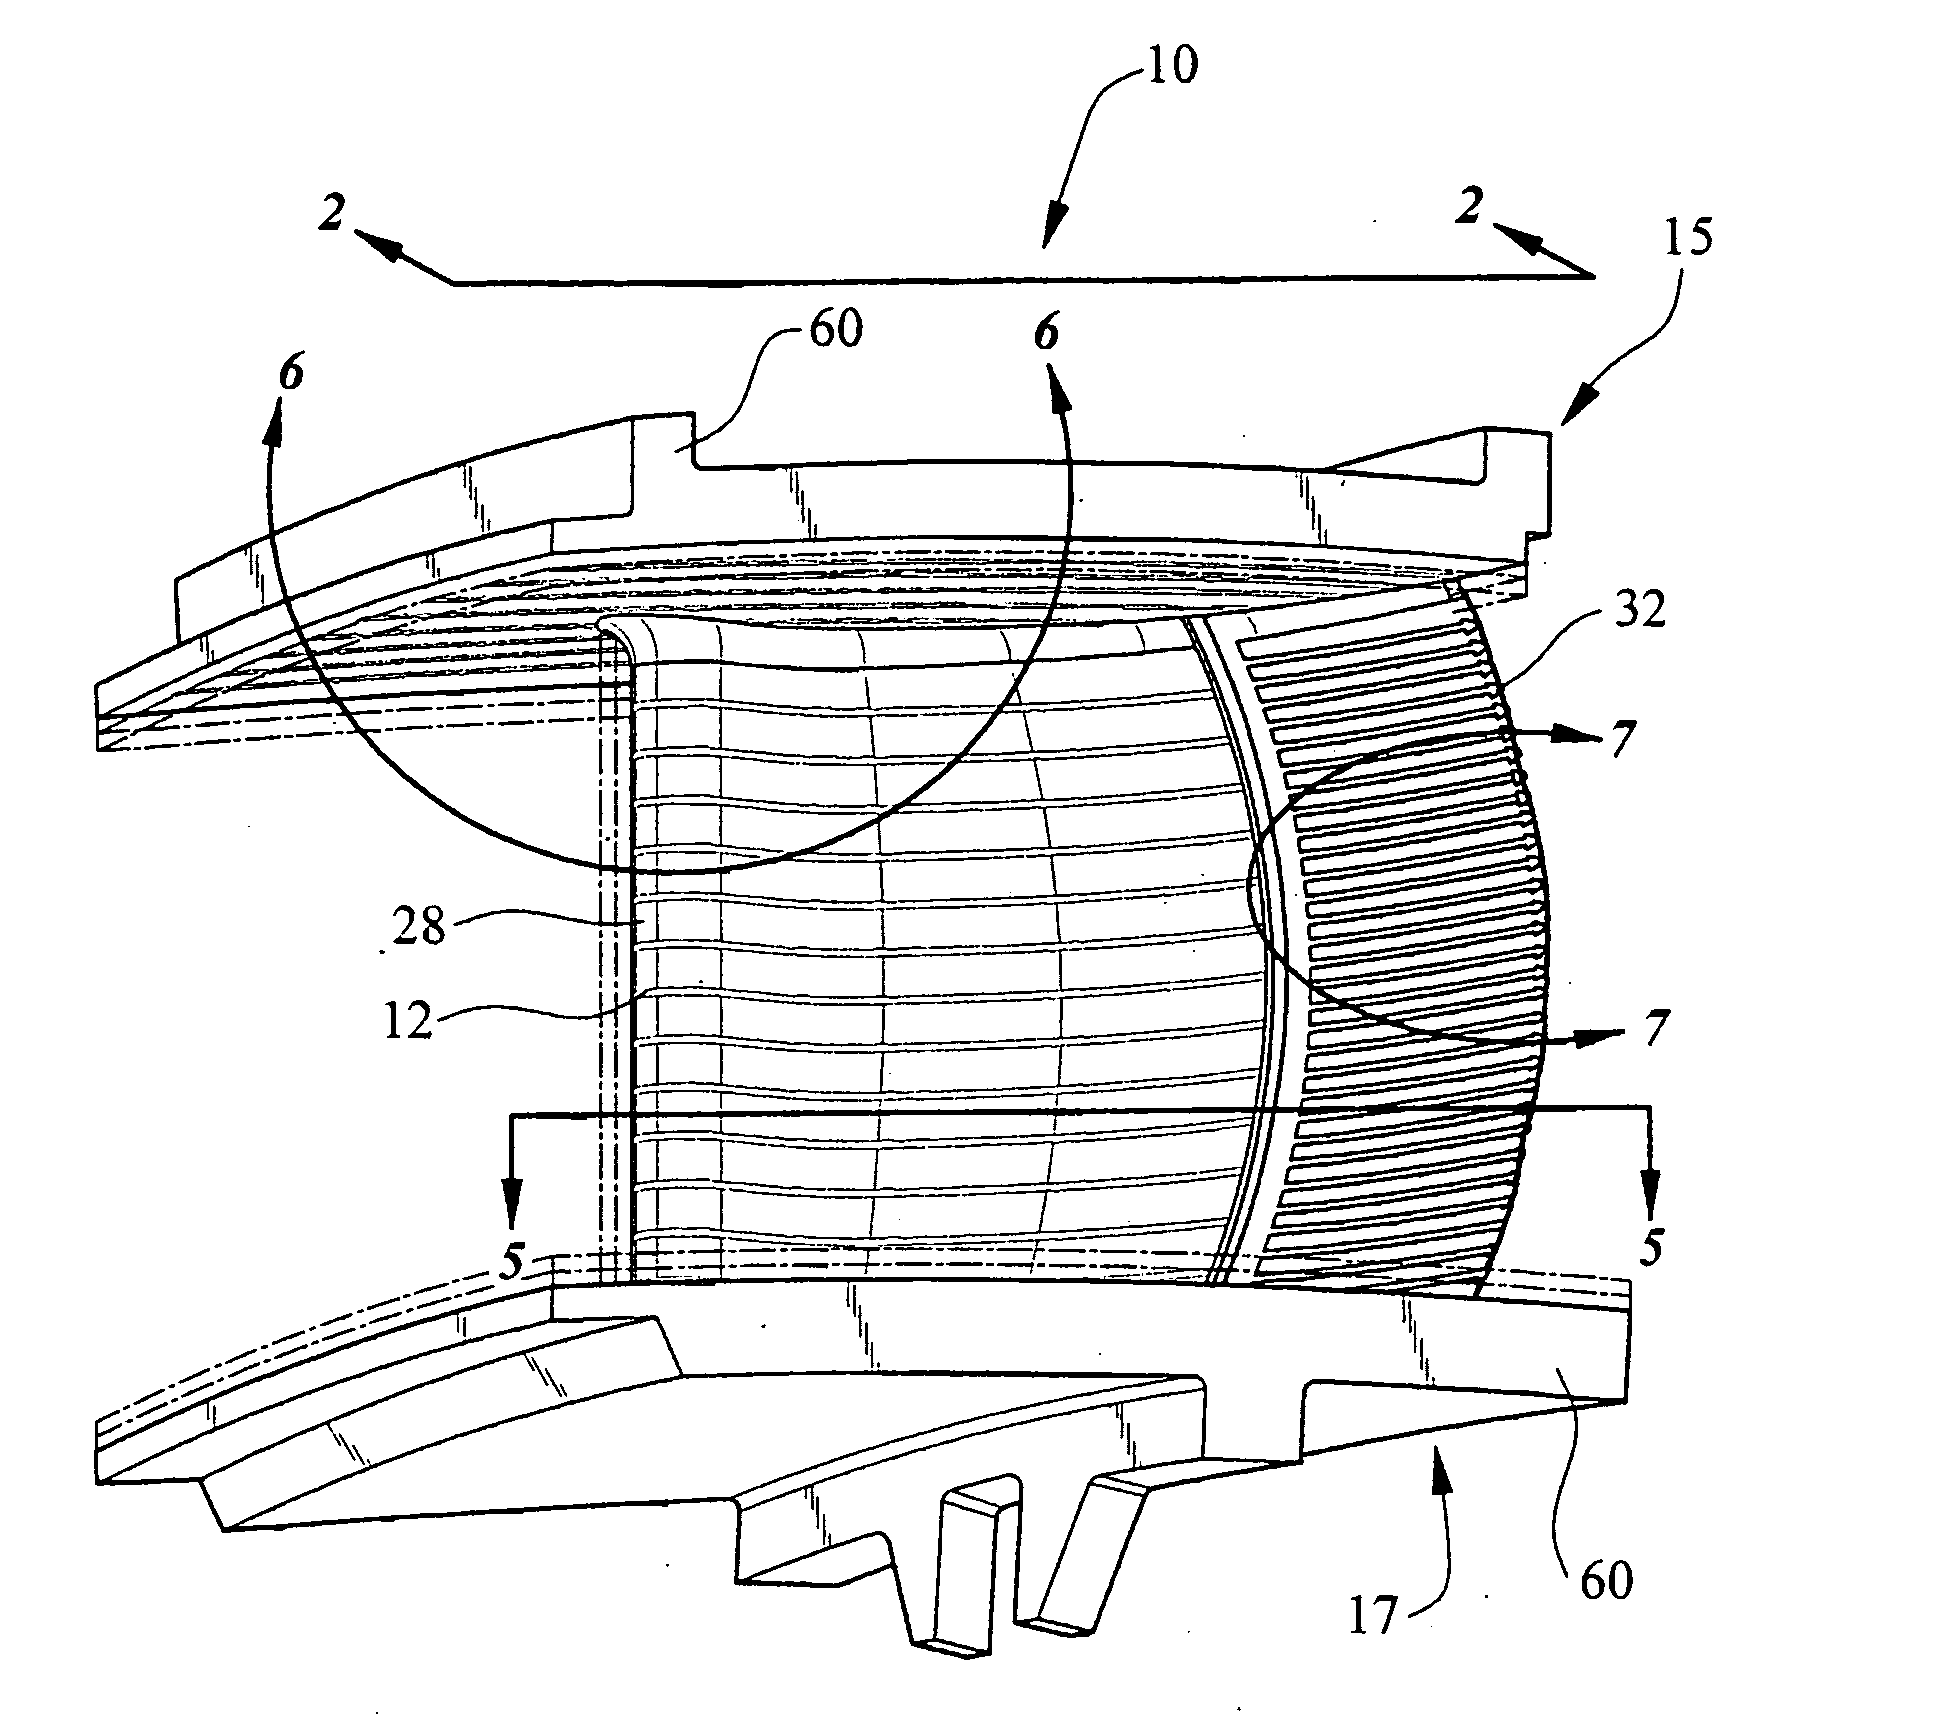 Cooling fluid preheating system for an airfoil in a turbine engine